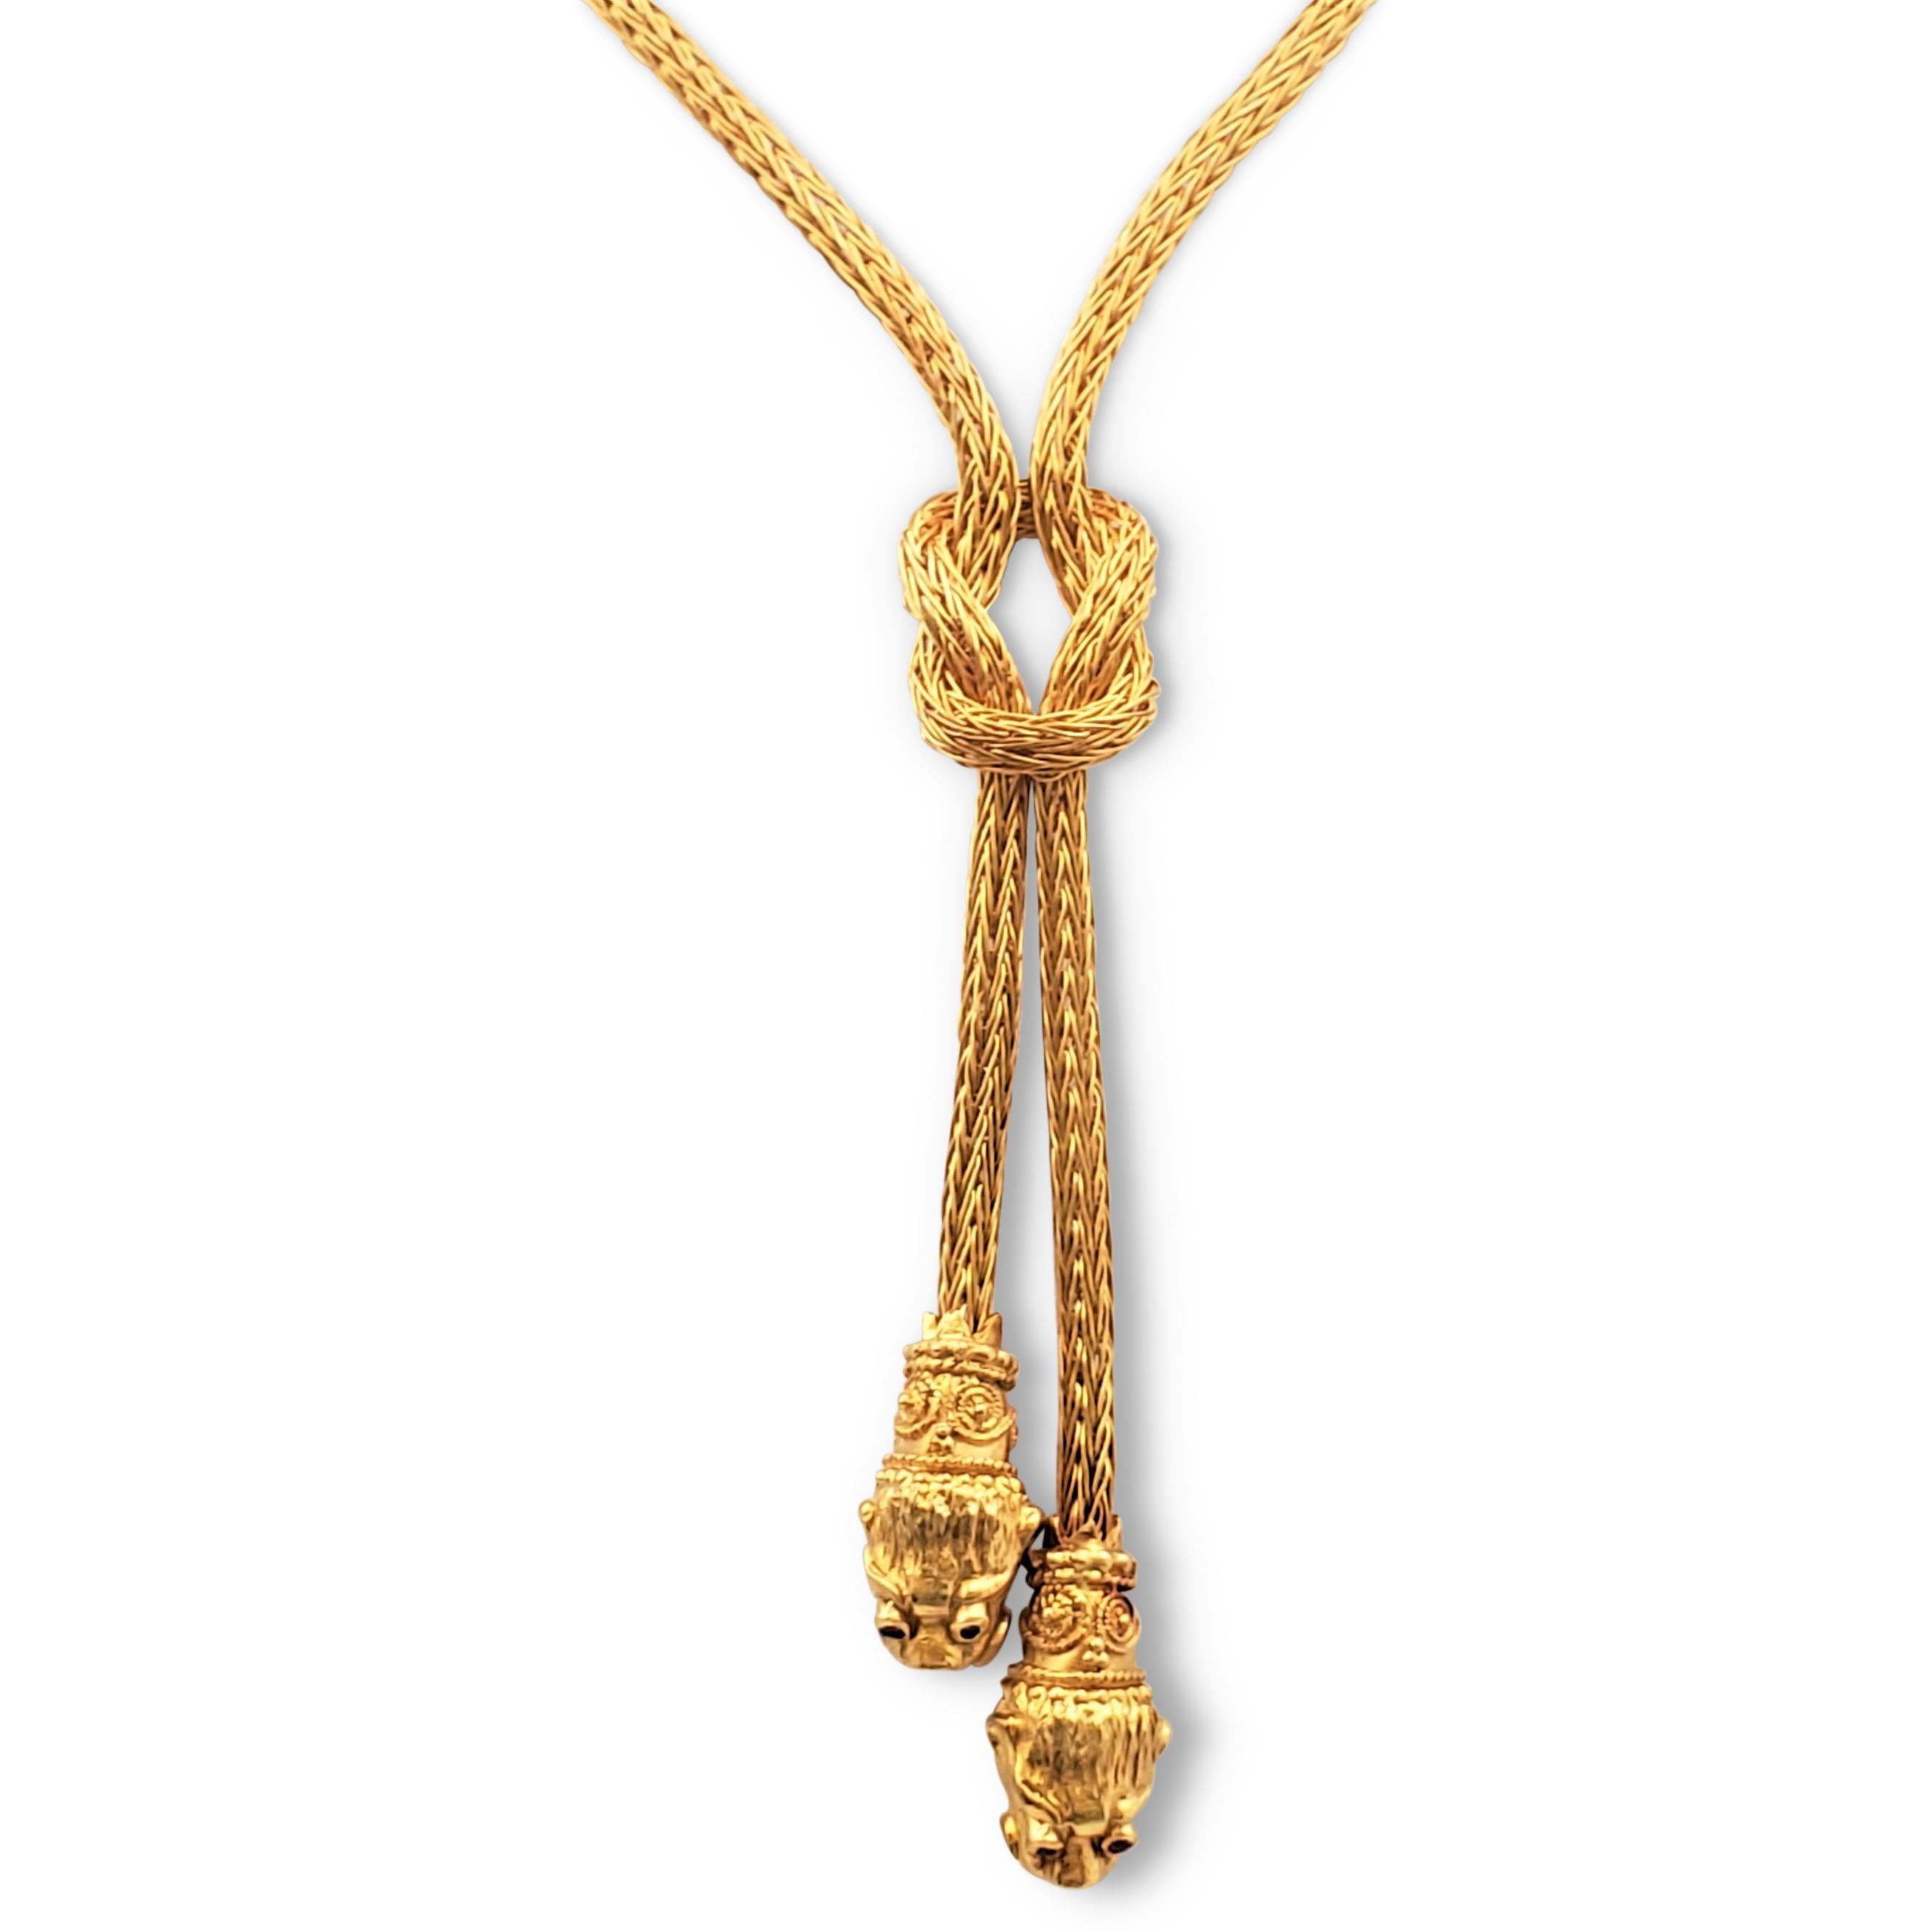 Authentic Ilias Lalaounis lariat necklace crafted in tubular braided 18 karat yellow gold centering a double knot, terminating in two stylized textured gold lion heads accented by ruby eyes. Patina consistent with age and wear. Lalaounis maker's